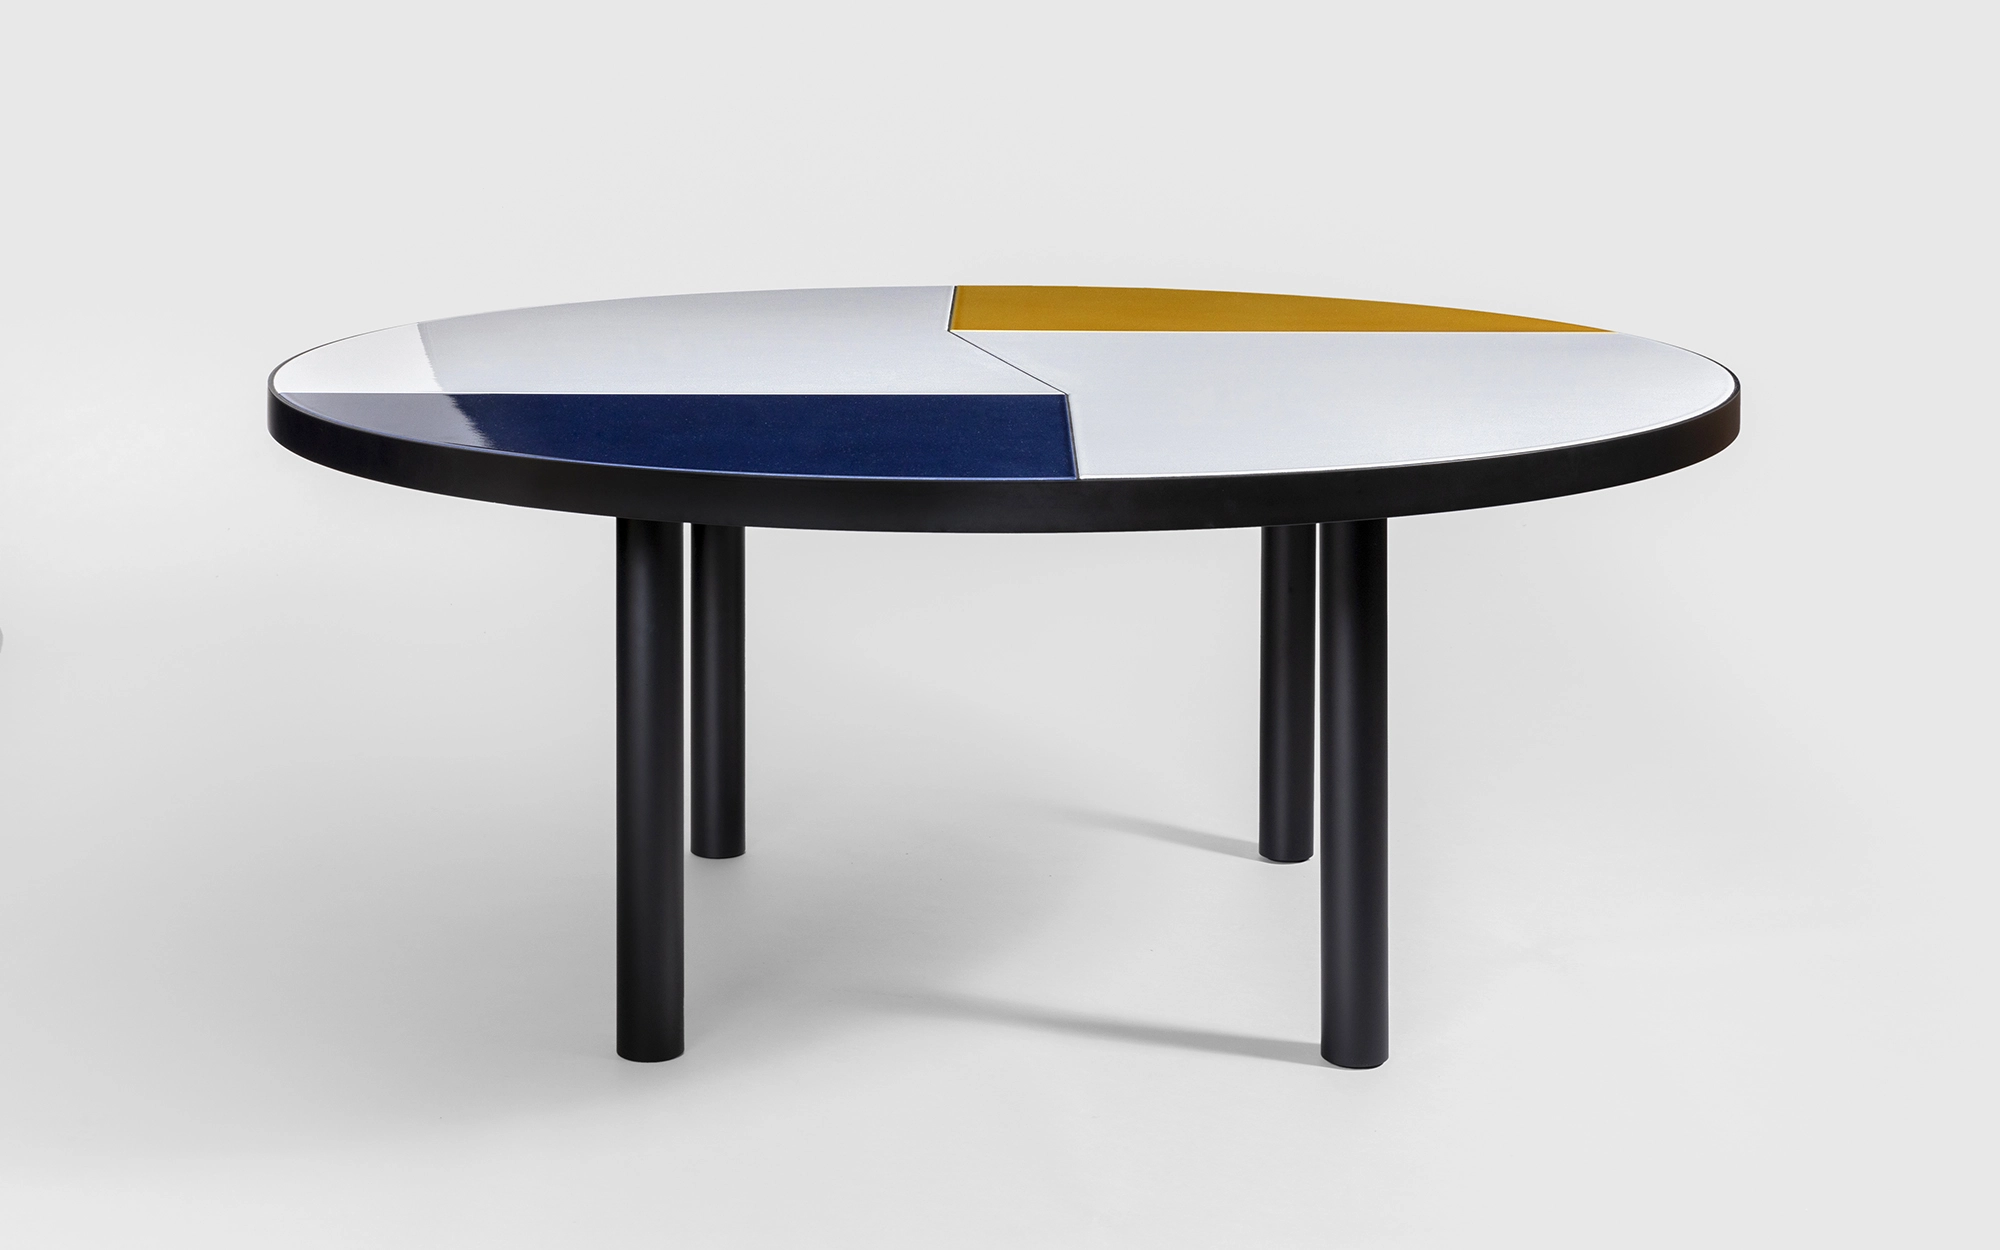 Fraction Dining Table - Pierre Charpin - Miscellaneous - Galerie kreo